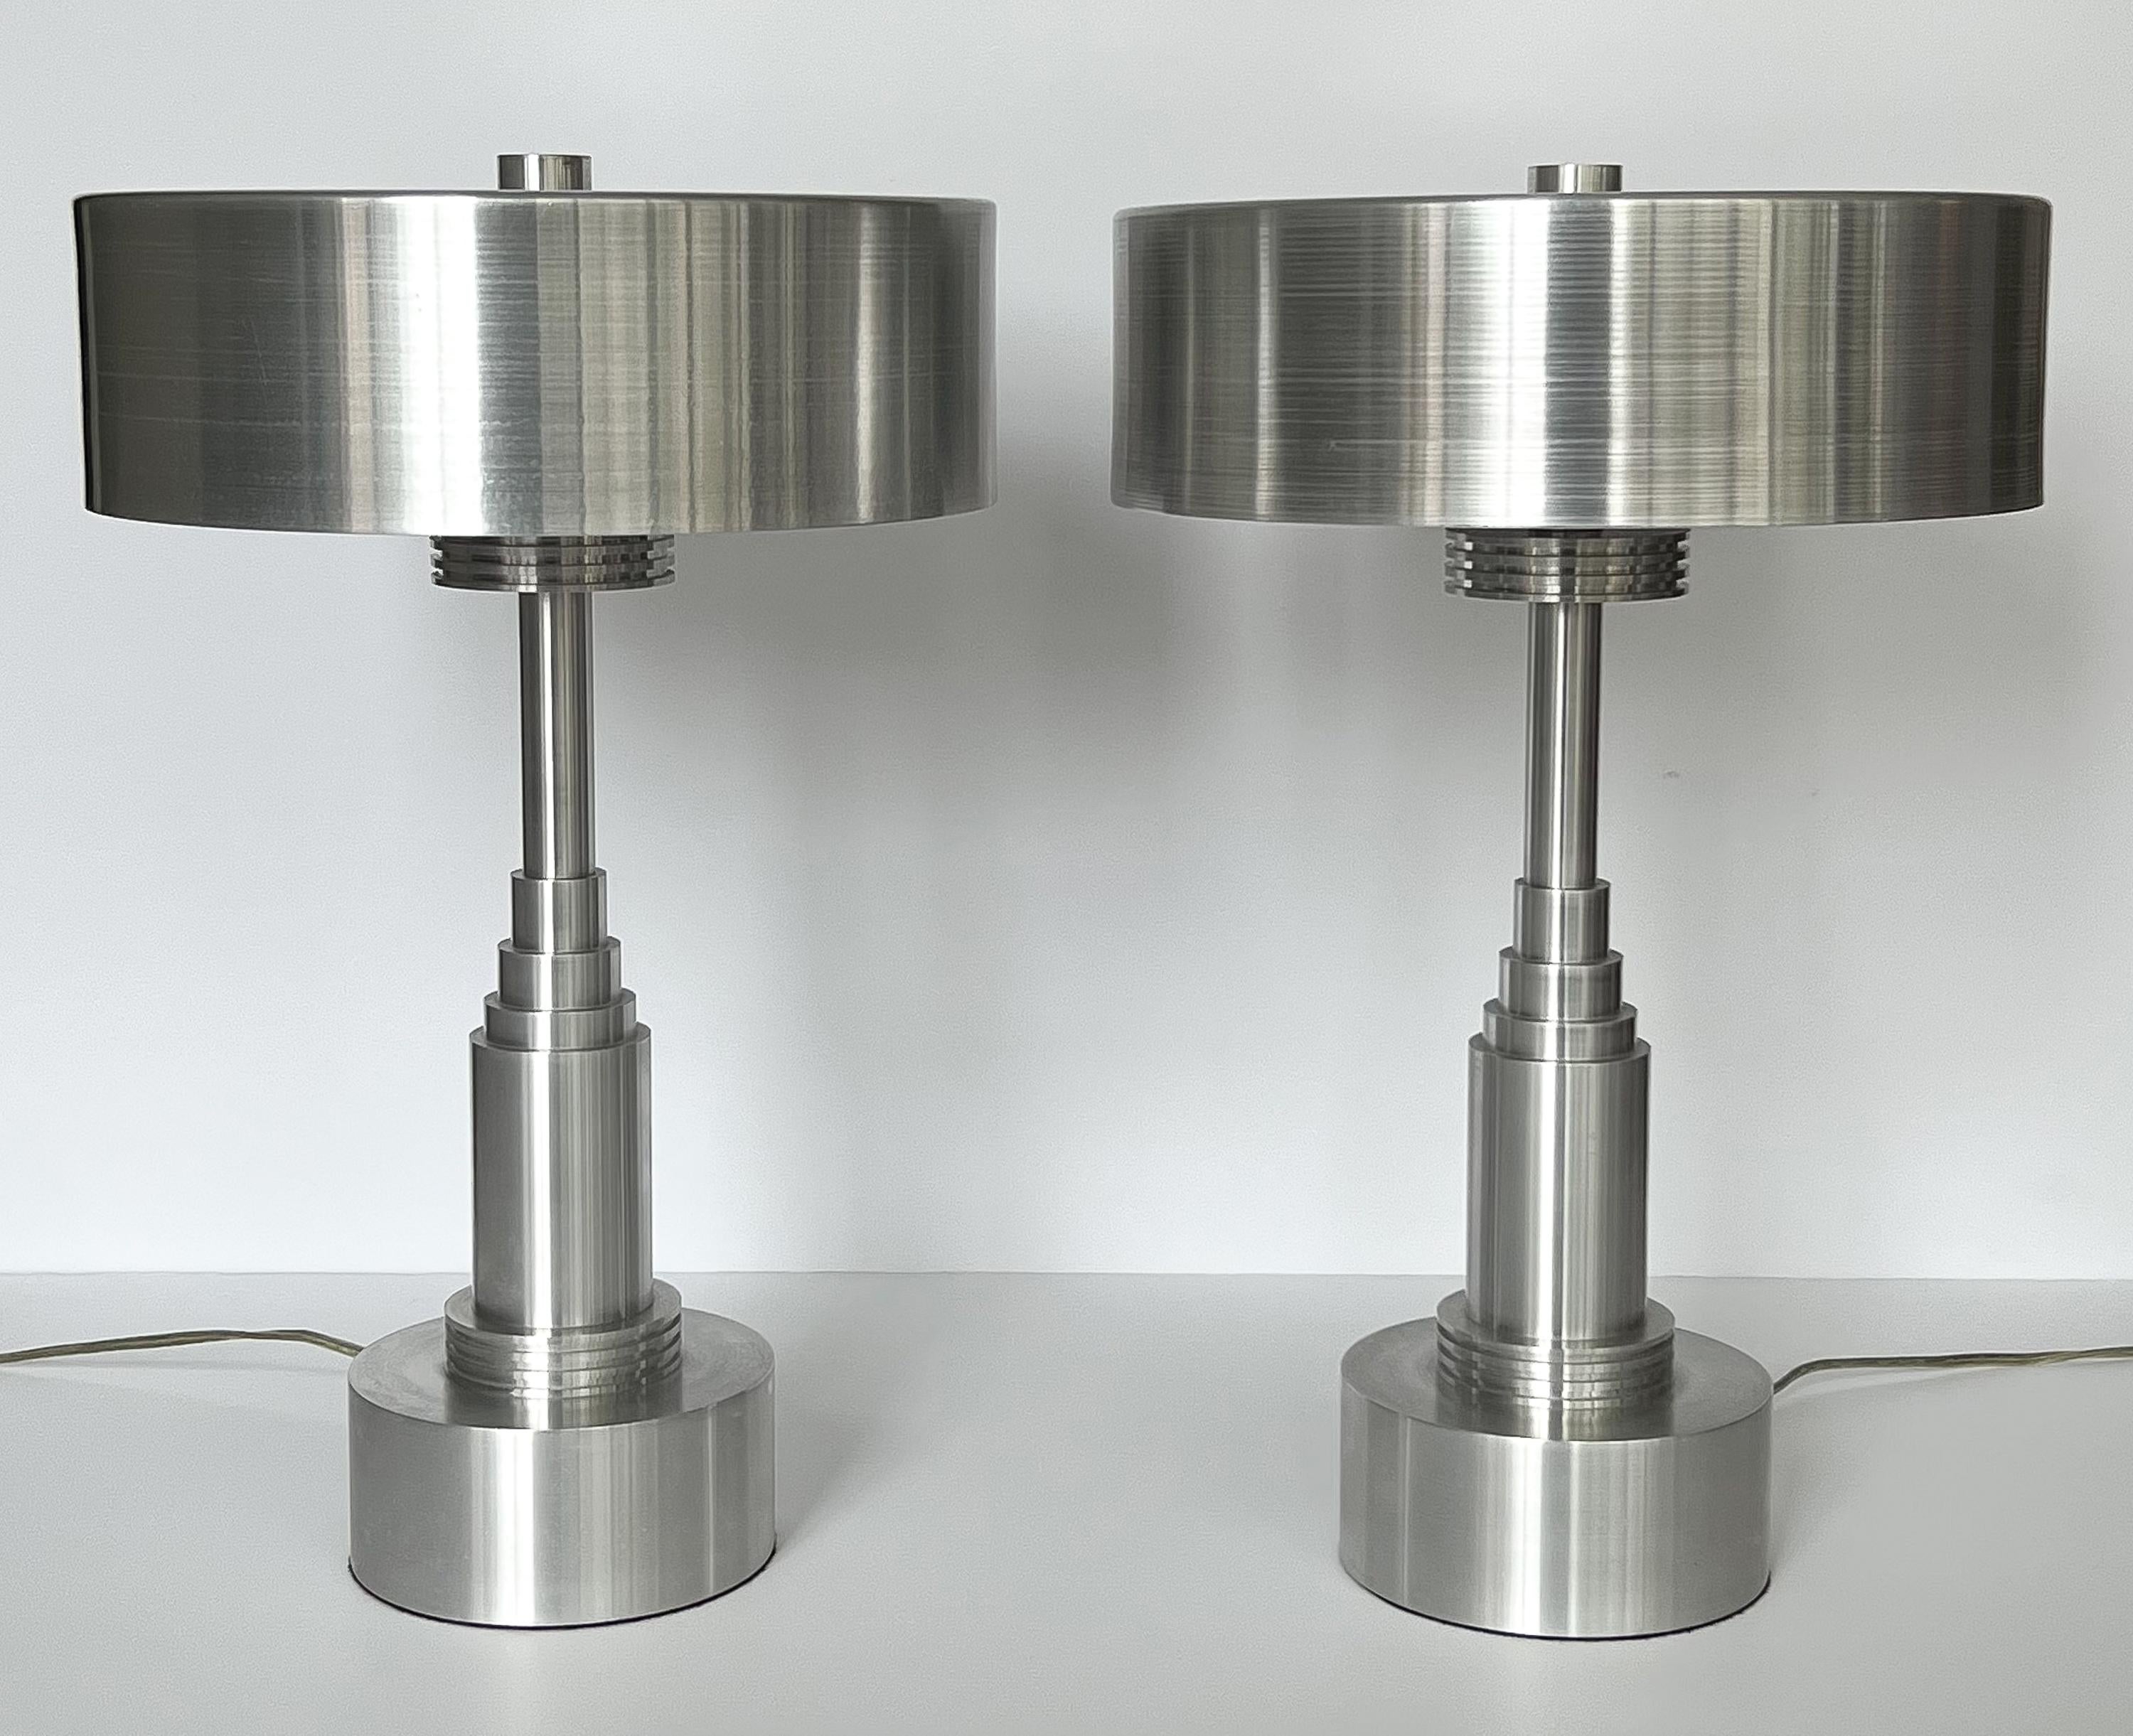 Striking pair of Modernist Machine Age spun aluminum table lamps in the style of Walter Von Nessen, USA circa 1970s.  These lamps feature an Art Deco / Skyscraper stepped design in heavy solid aluminum.  Spun aluminum shades measure 4